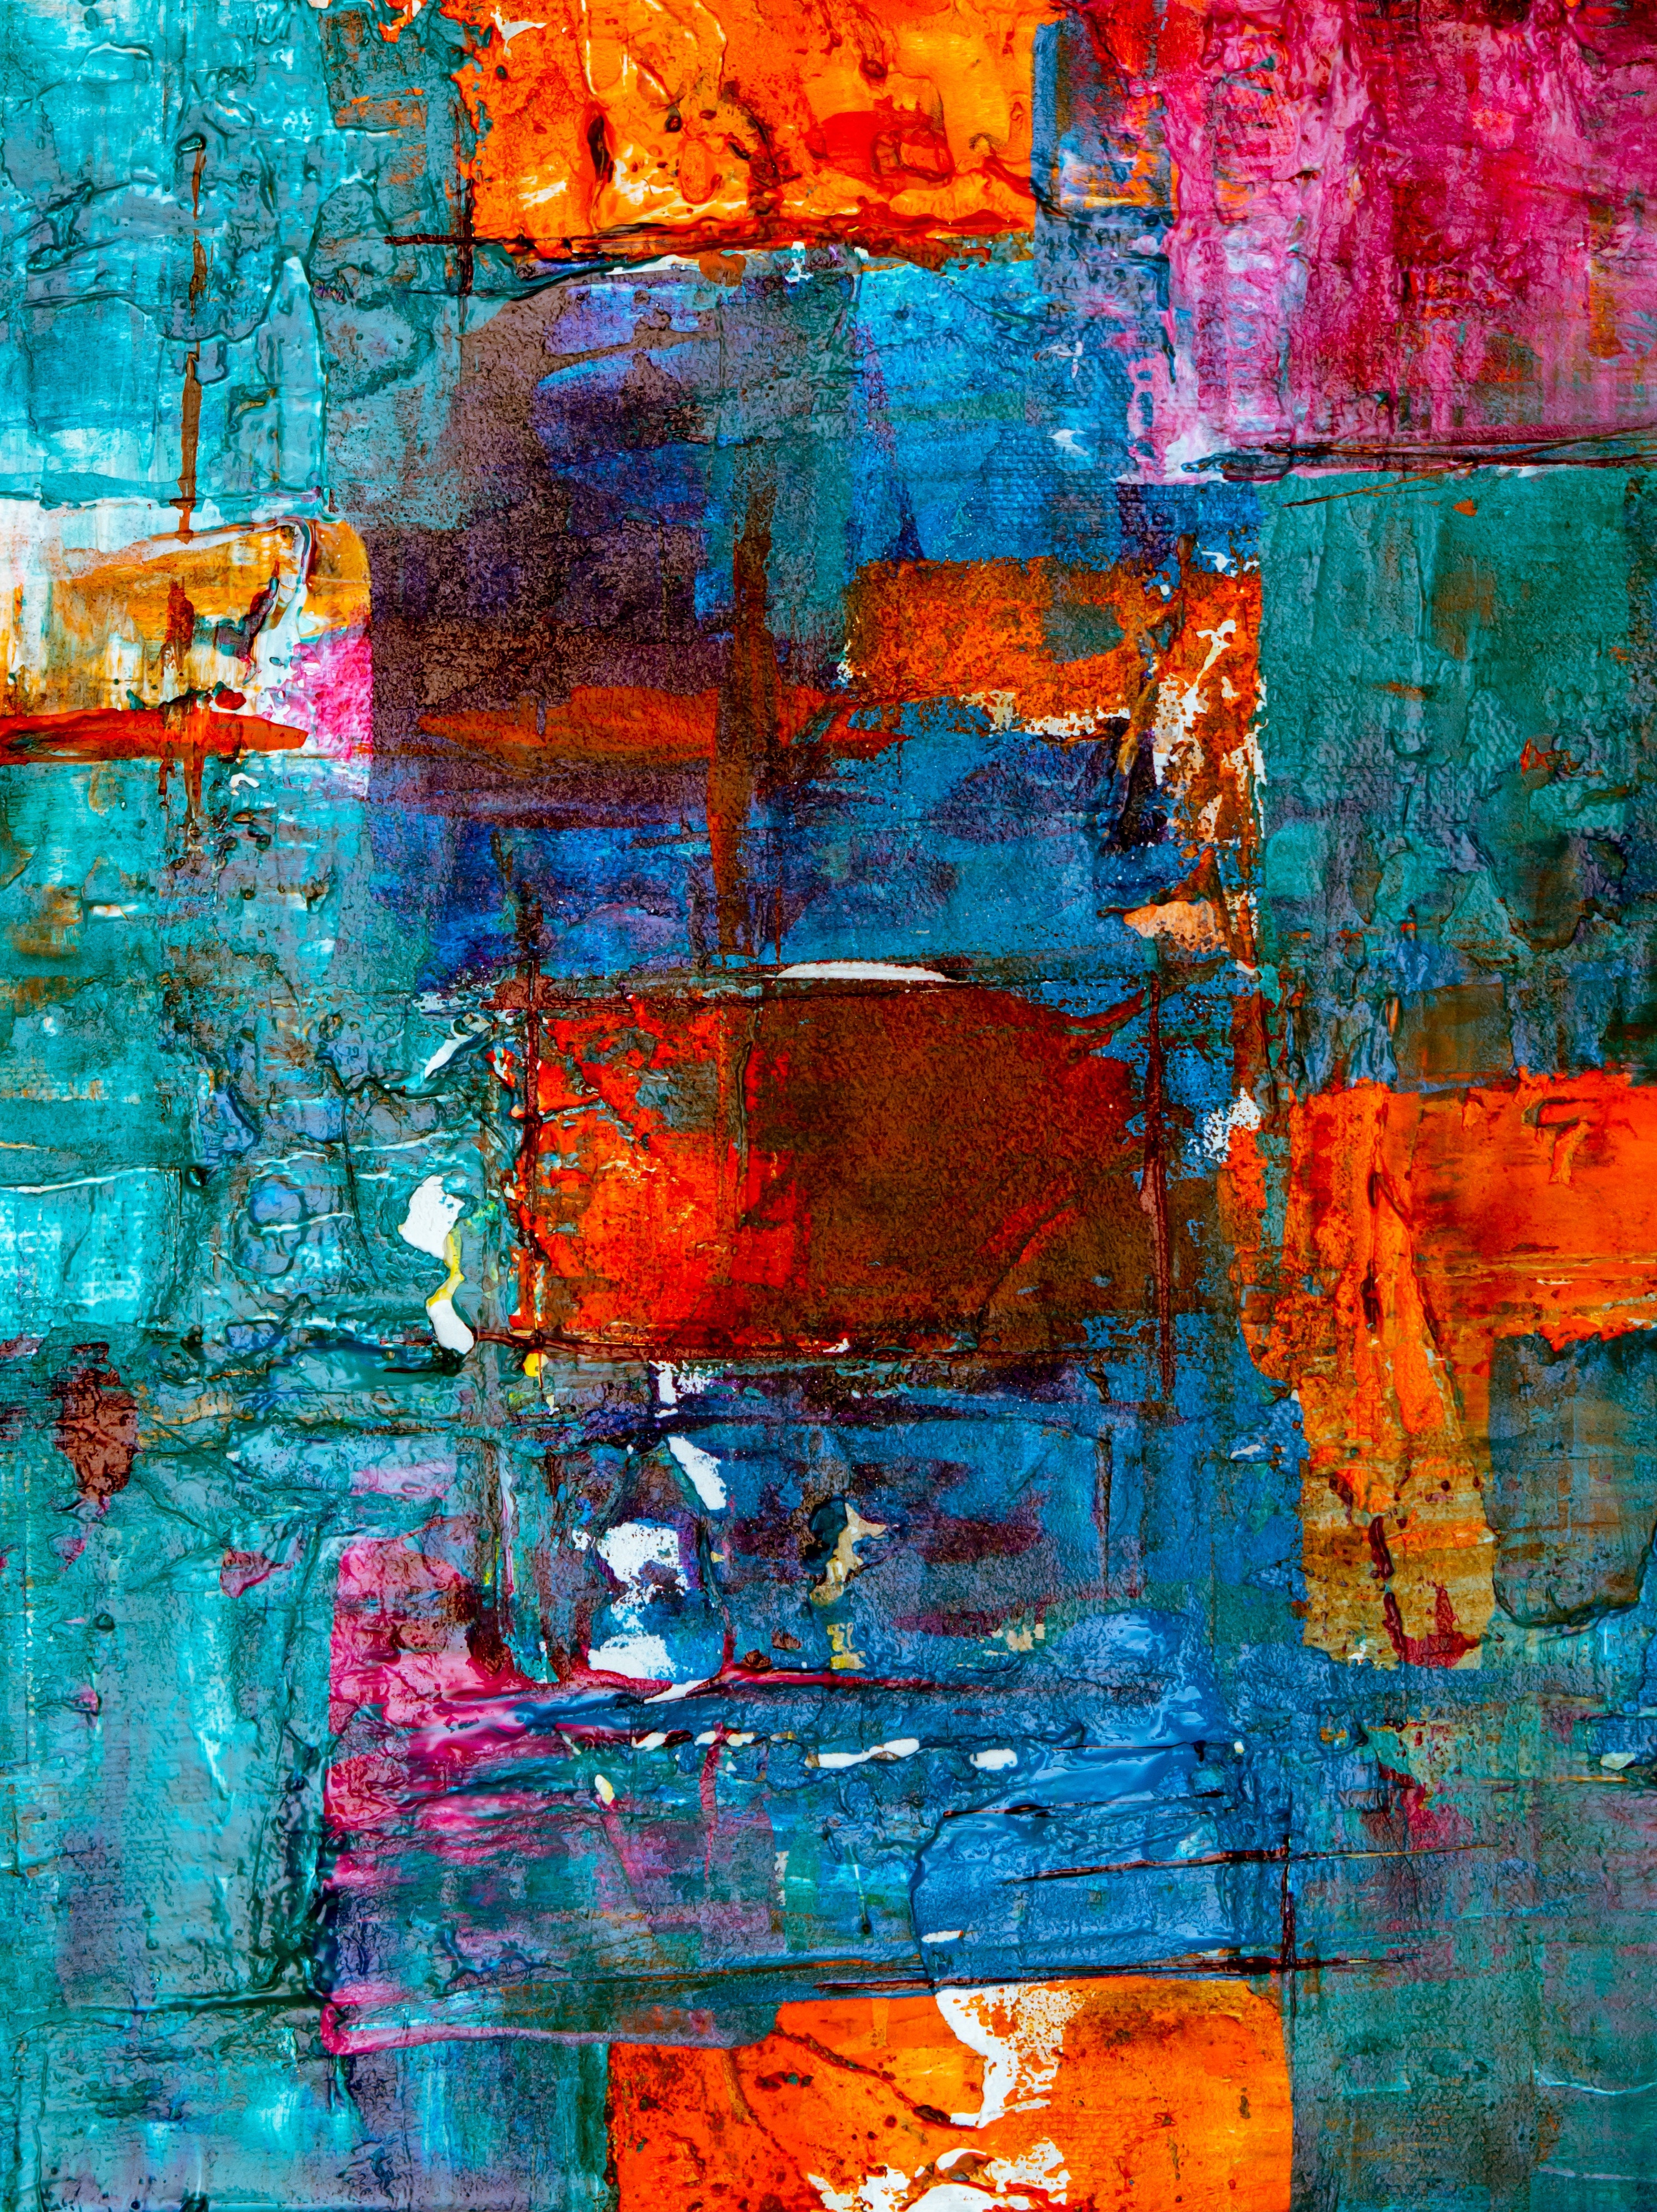 stains, multicolored, motley, texture, textures, paint, form, relief, spots, forms cellphone